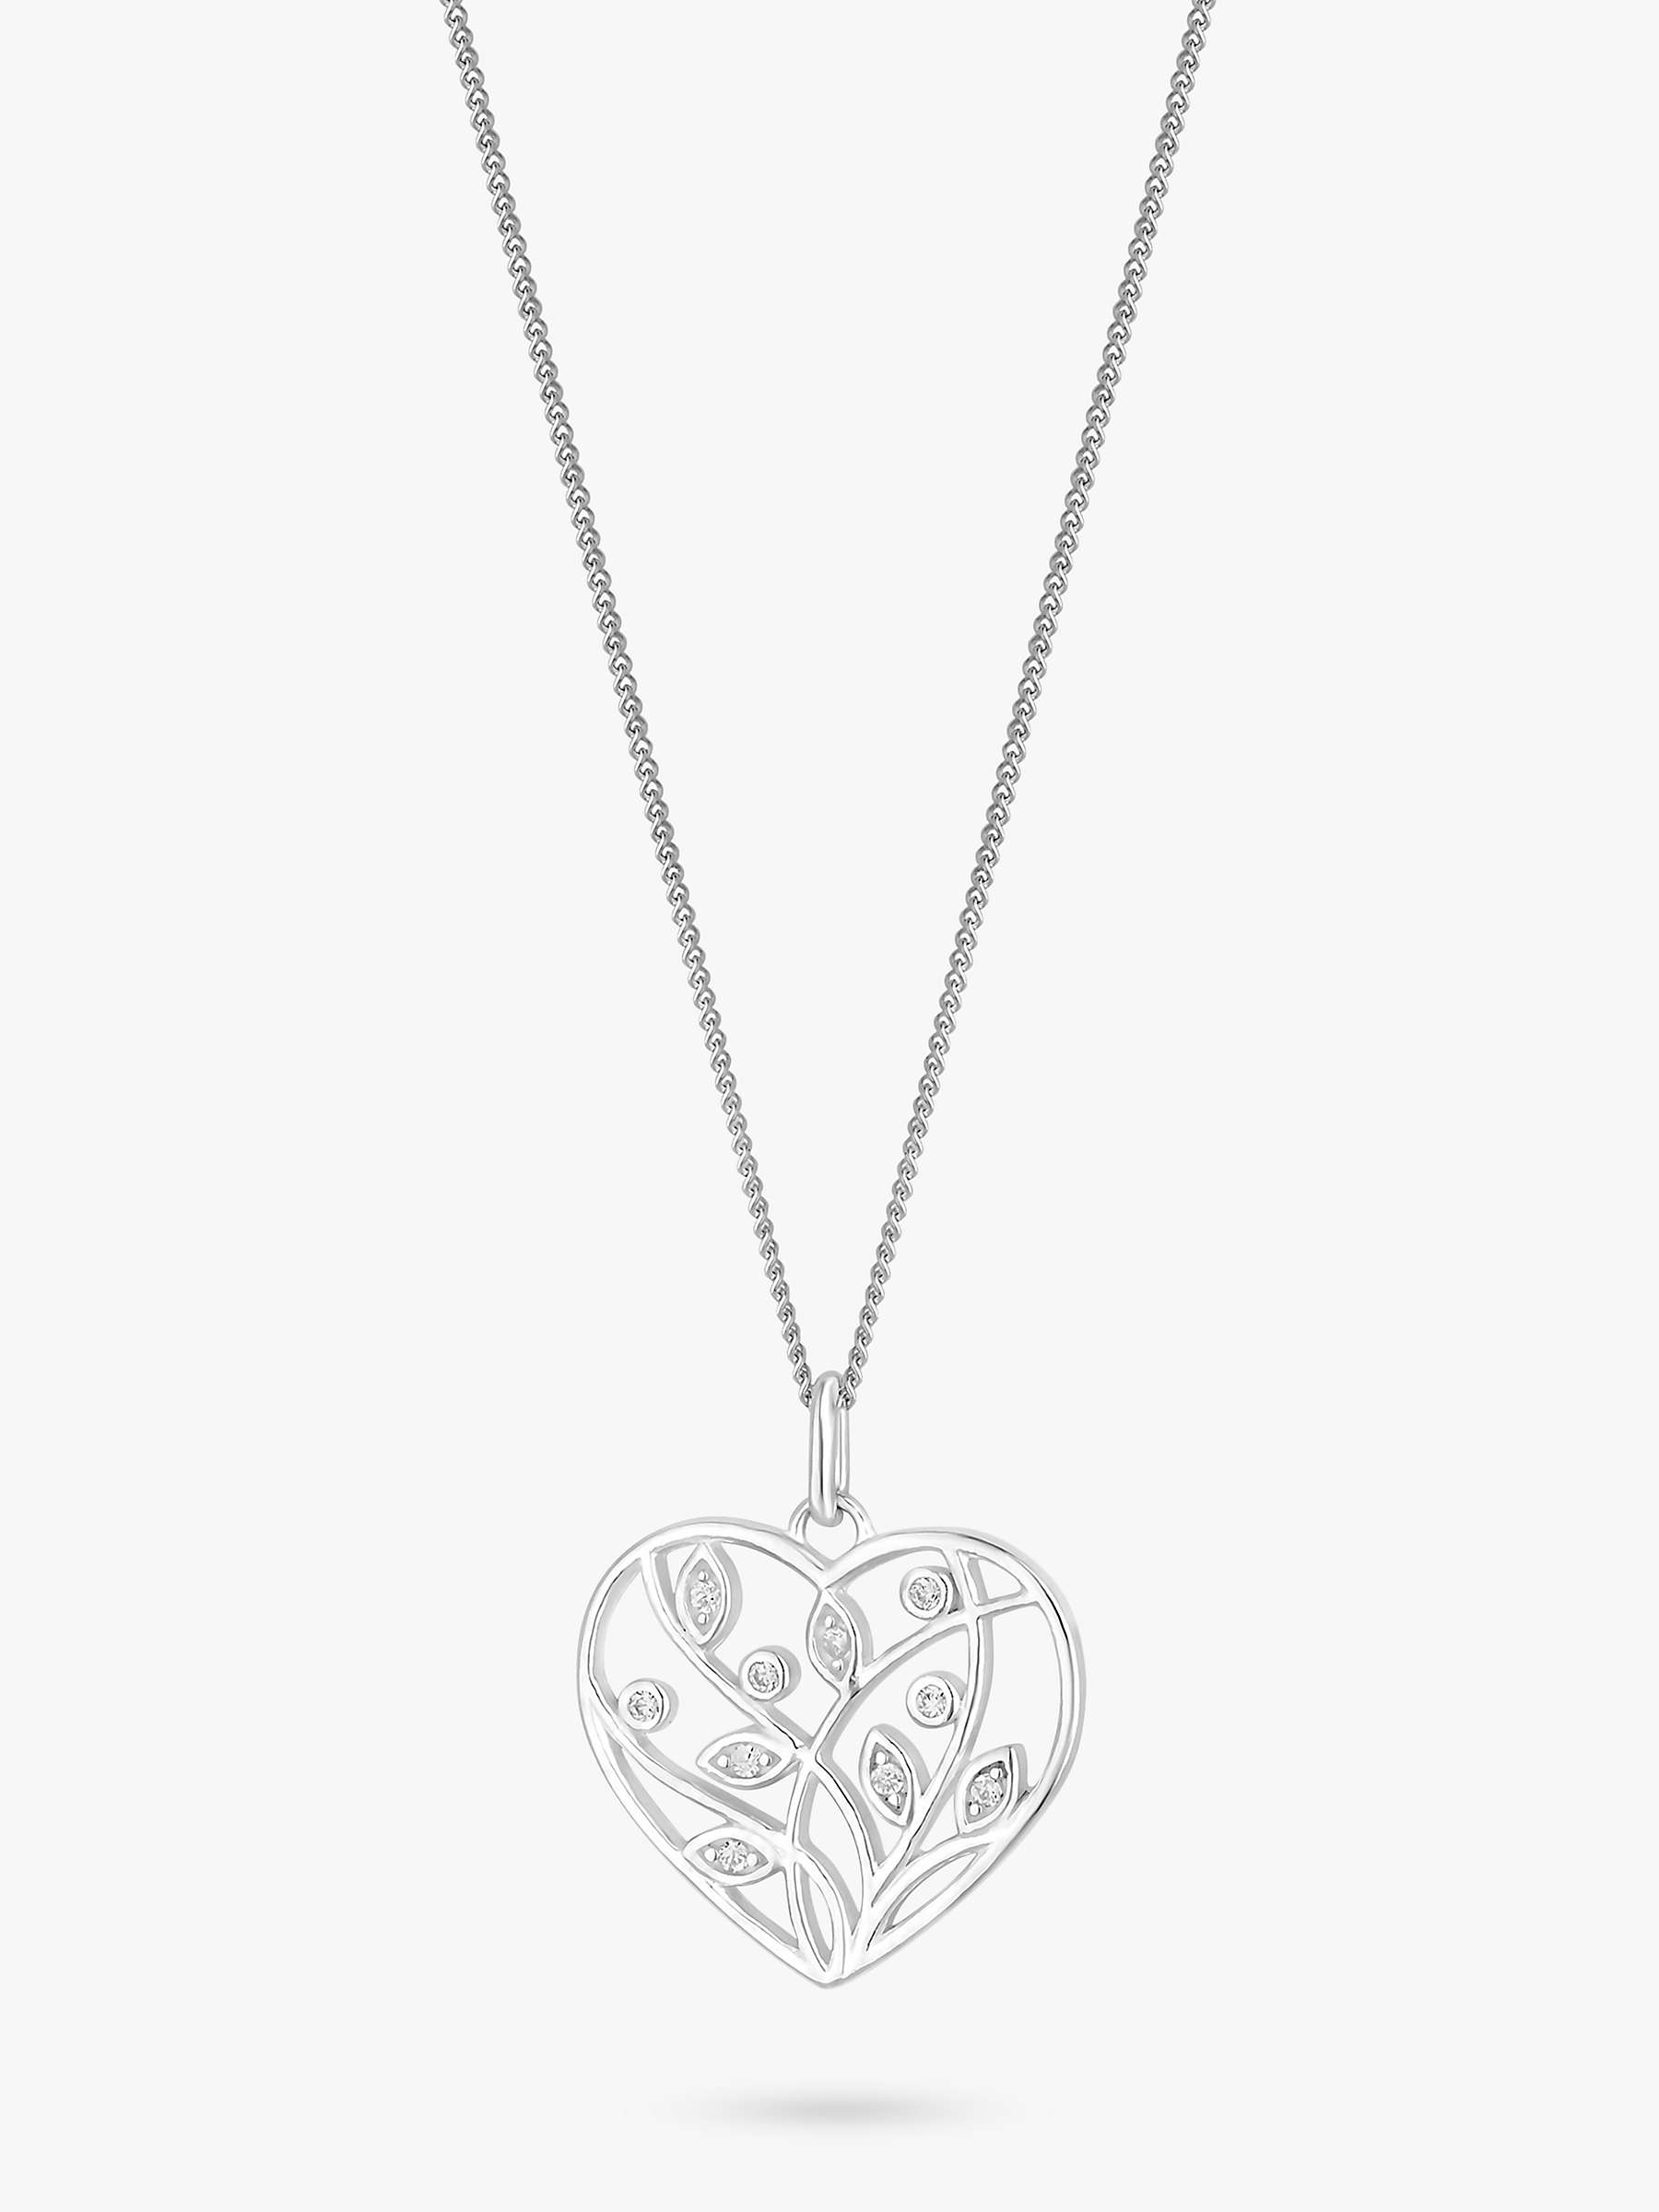 Buy Simply Silver Tree of Love Heart Pendant Necklace, Silver Online at johnlewis.com